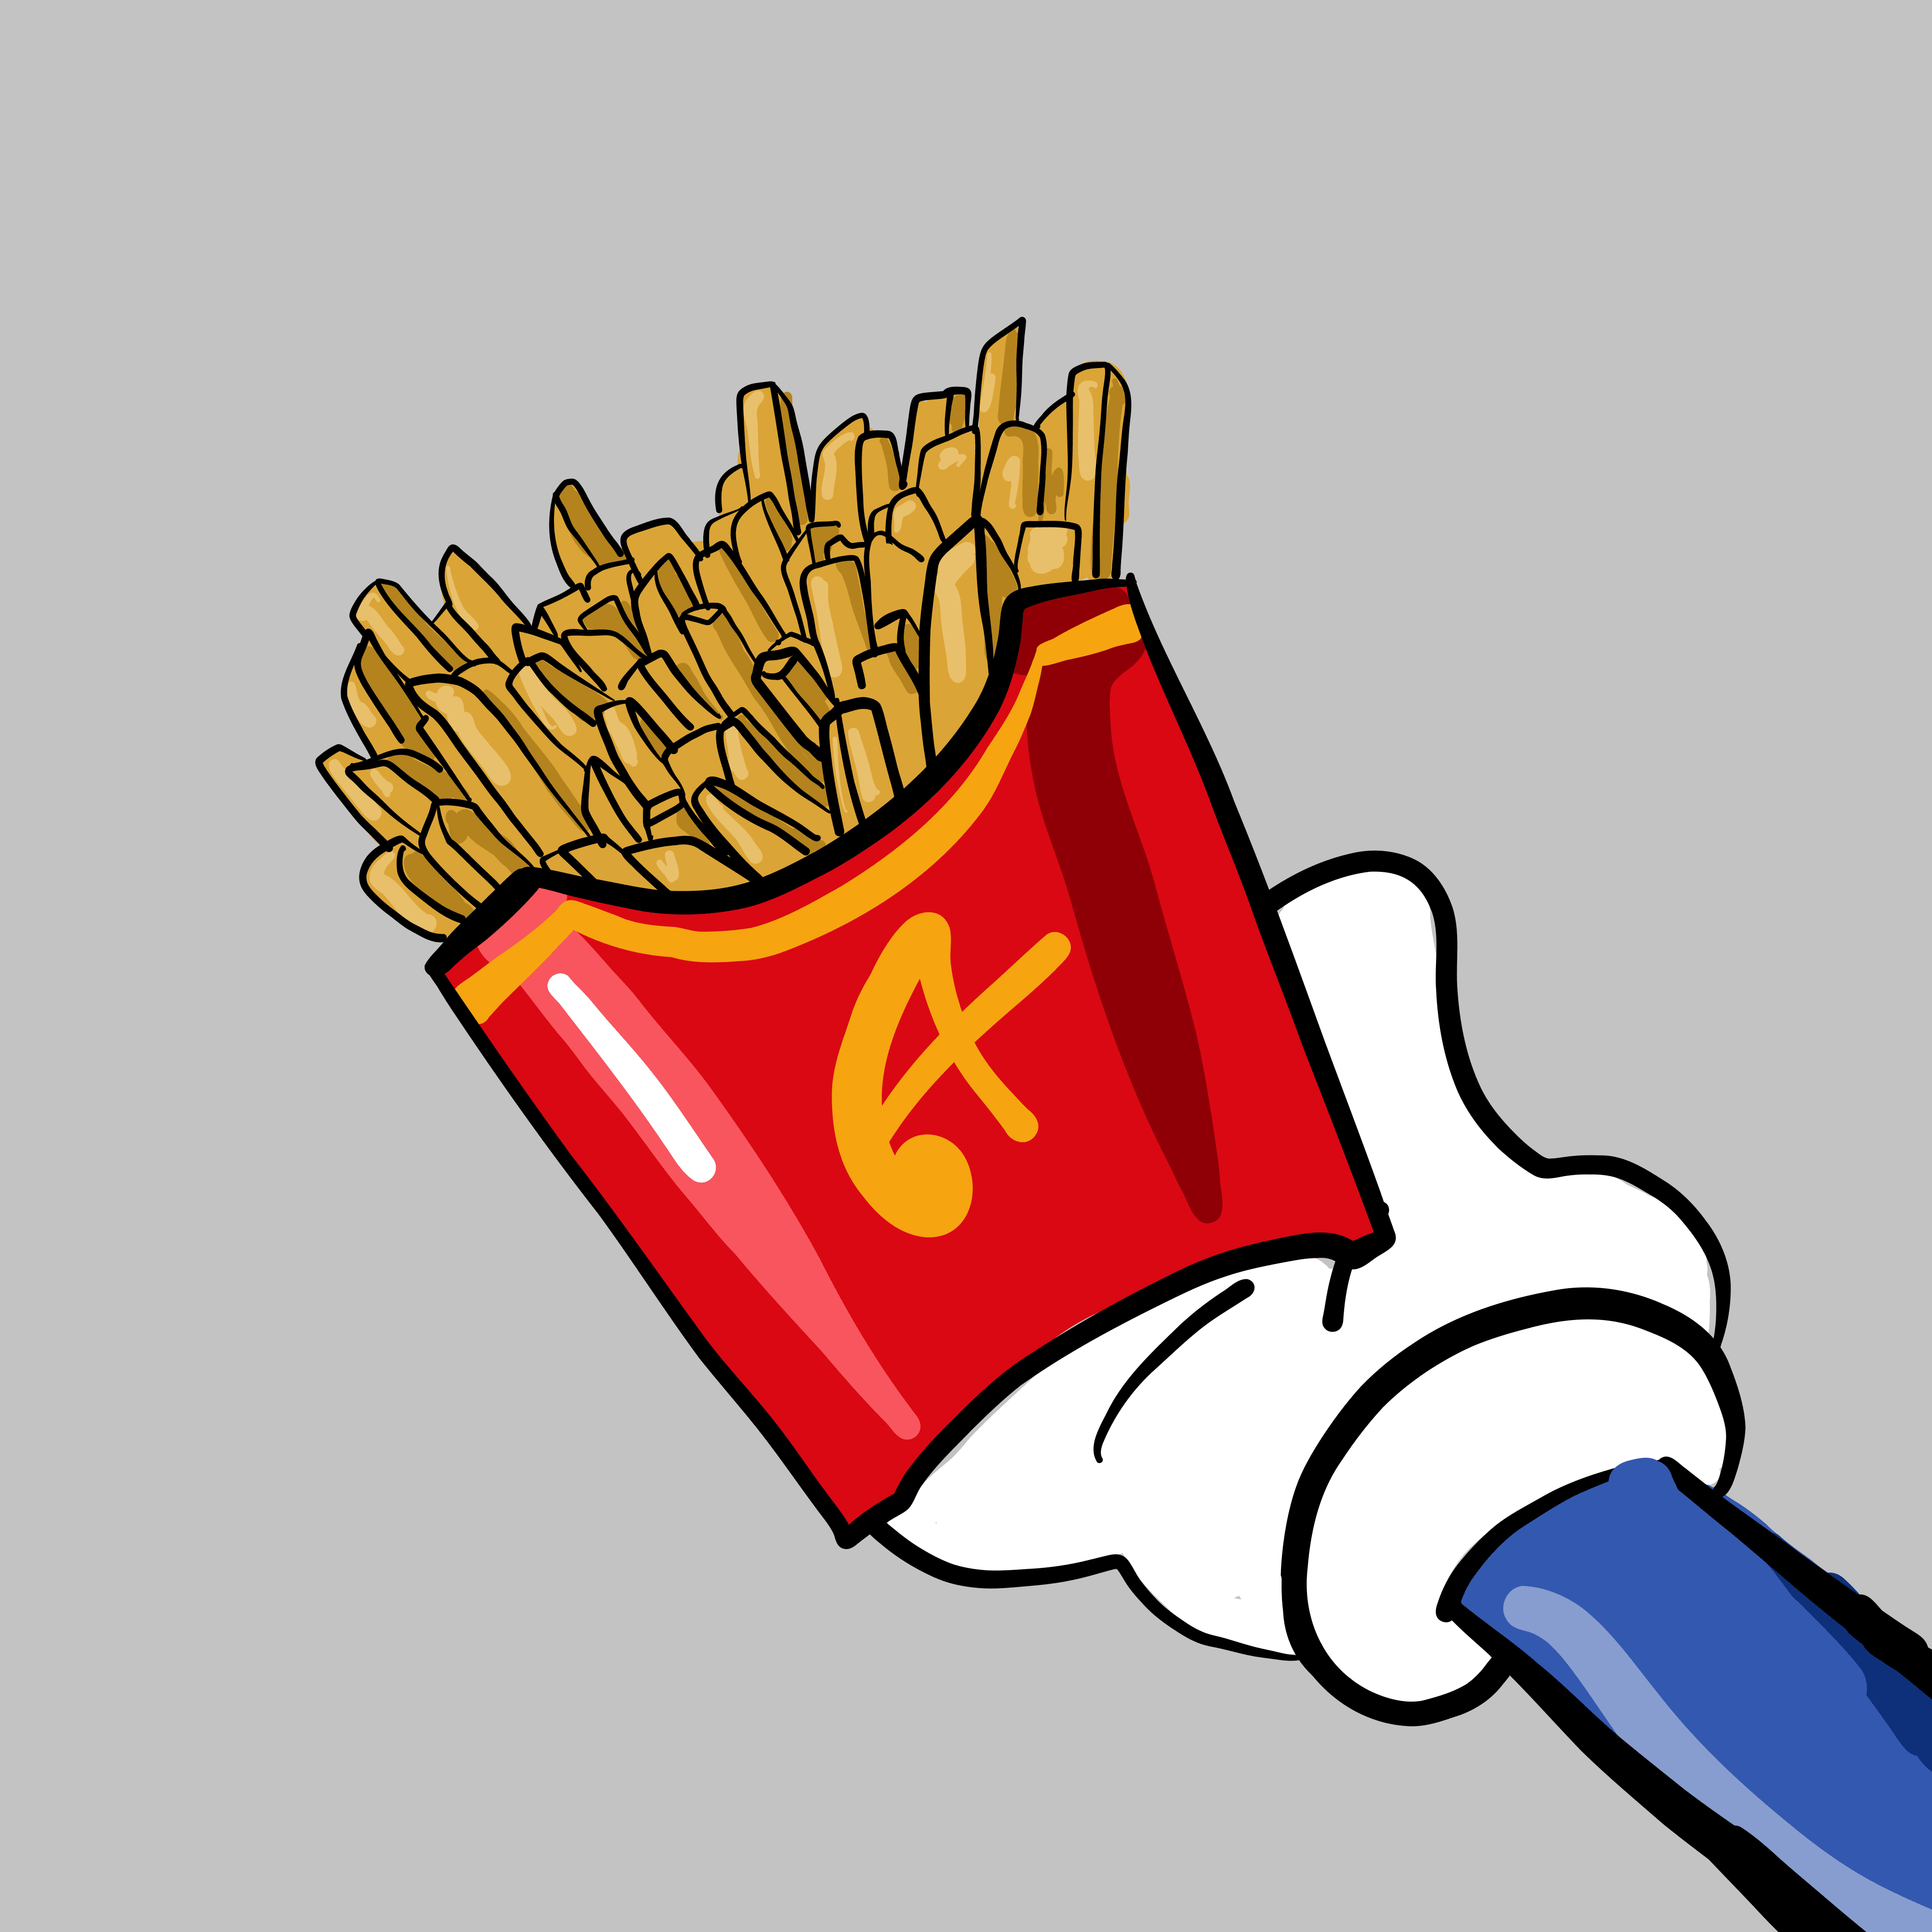 Andy Fries